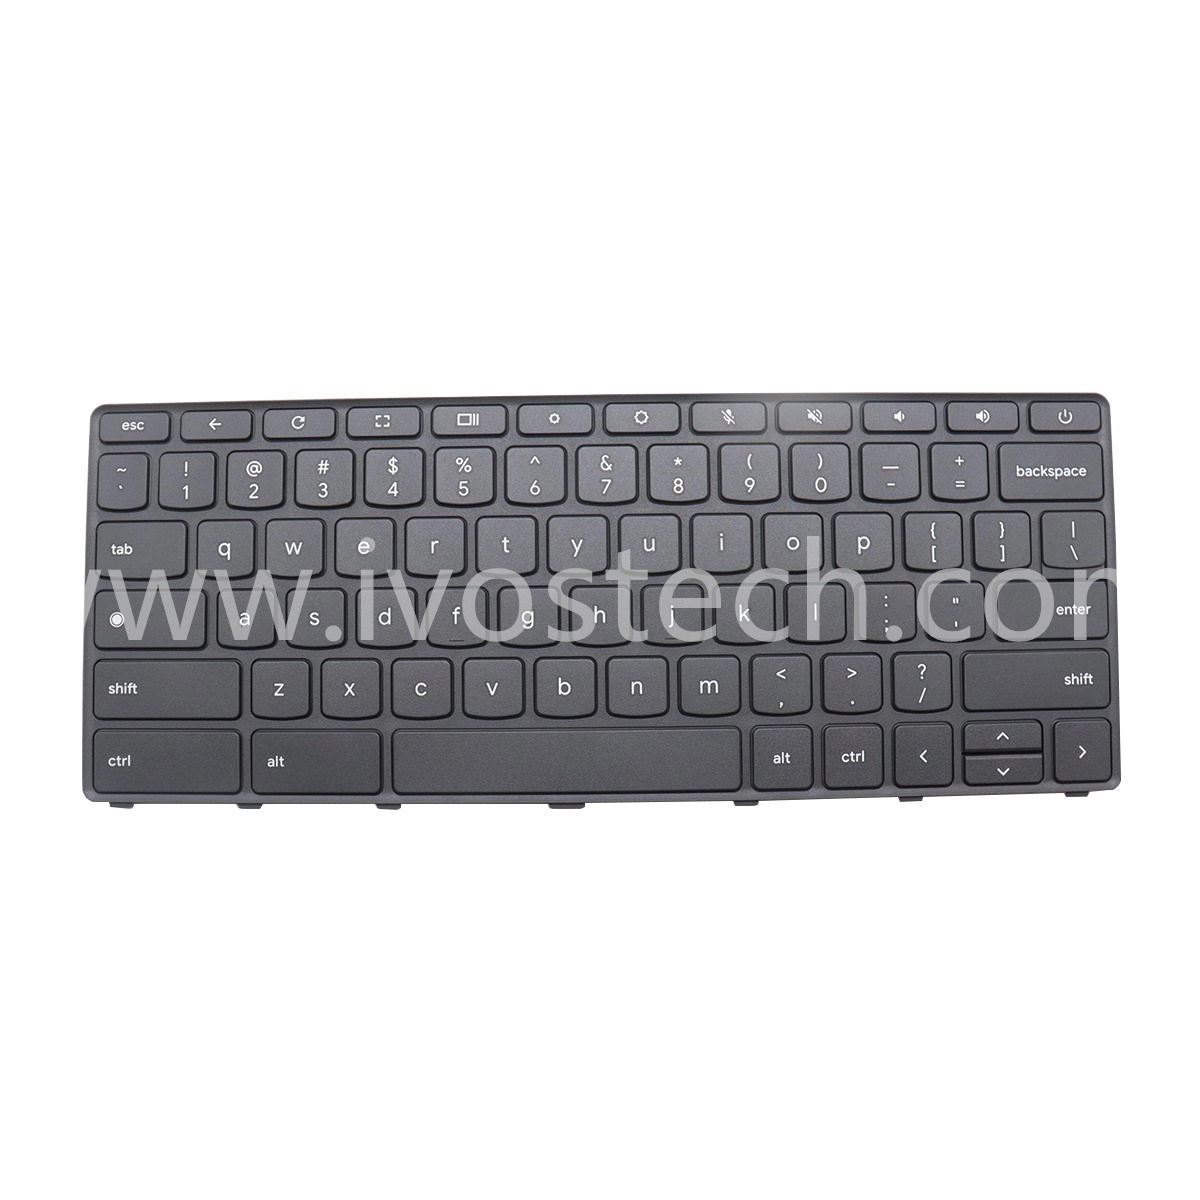 5N21L43957 Laptop Replacement Keyboard US Layout for Lenovo Chromebook 11 100e 4th Gen Intel 83G8 83G9